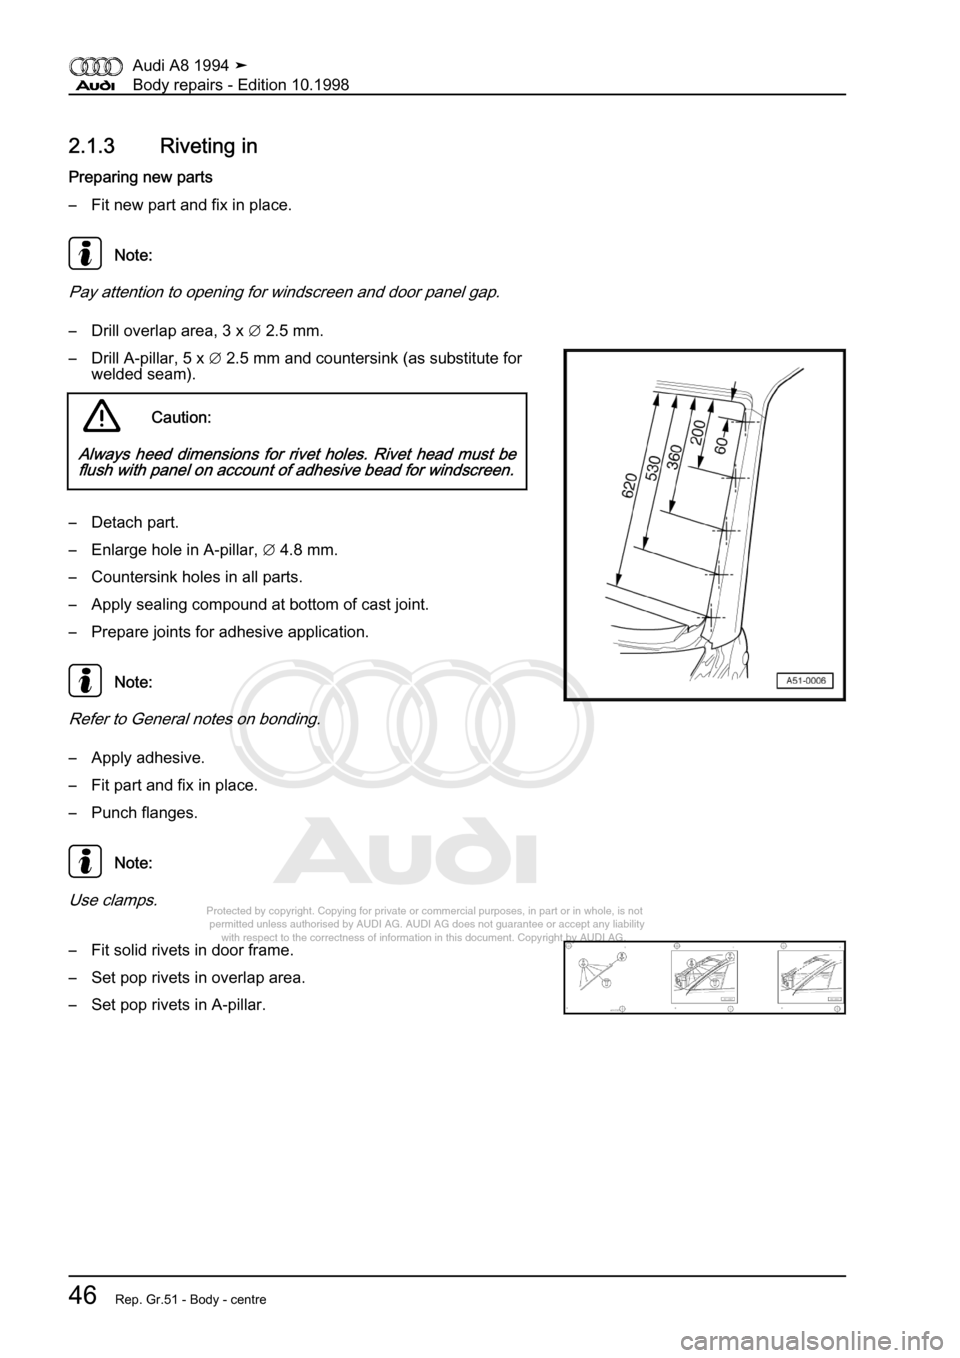 AUDI A8 1994 D4 / 1.G Body Repairs Service Manual 
Protected by copyright. Copying for private or commercial purposes, in p\
art or in whole, is not 
 permitted unless authorised by AUDI AG. AUDI AG does not guarantee or a\
ccept any liability 
     